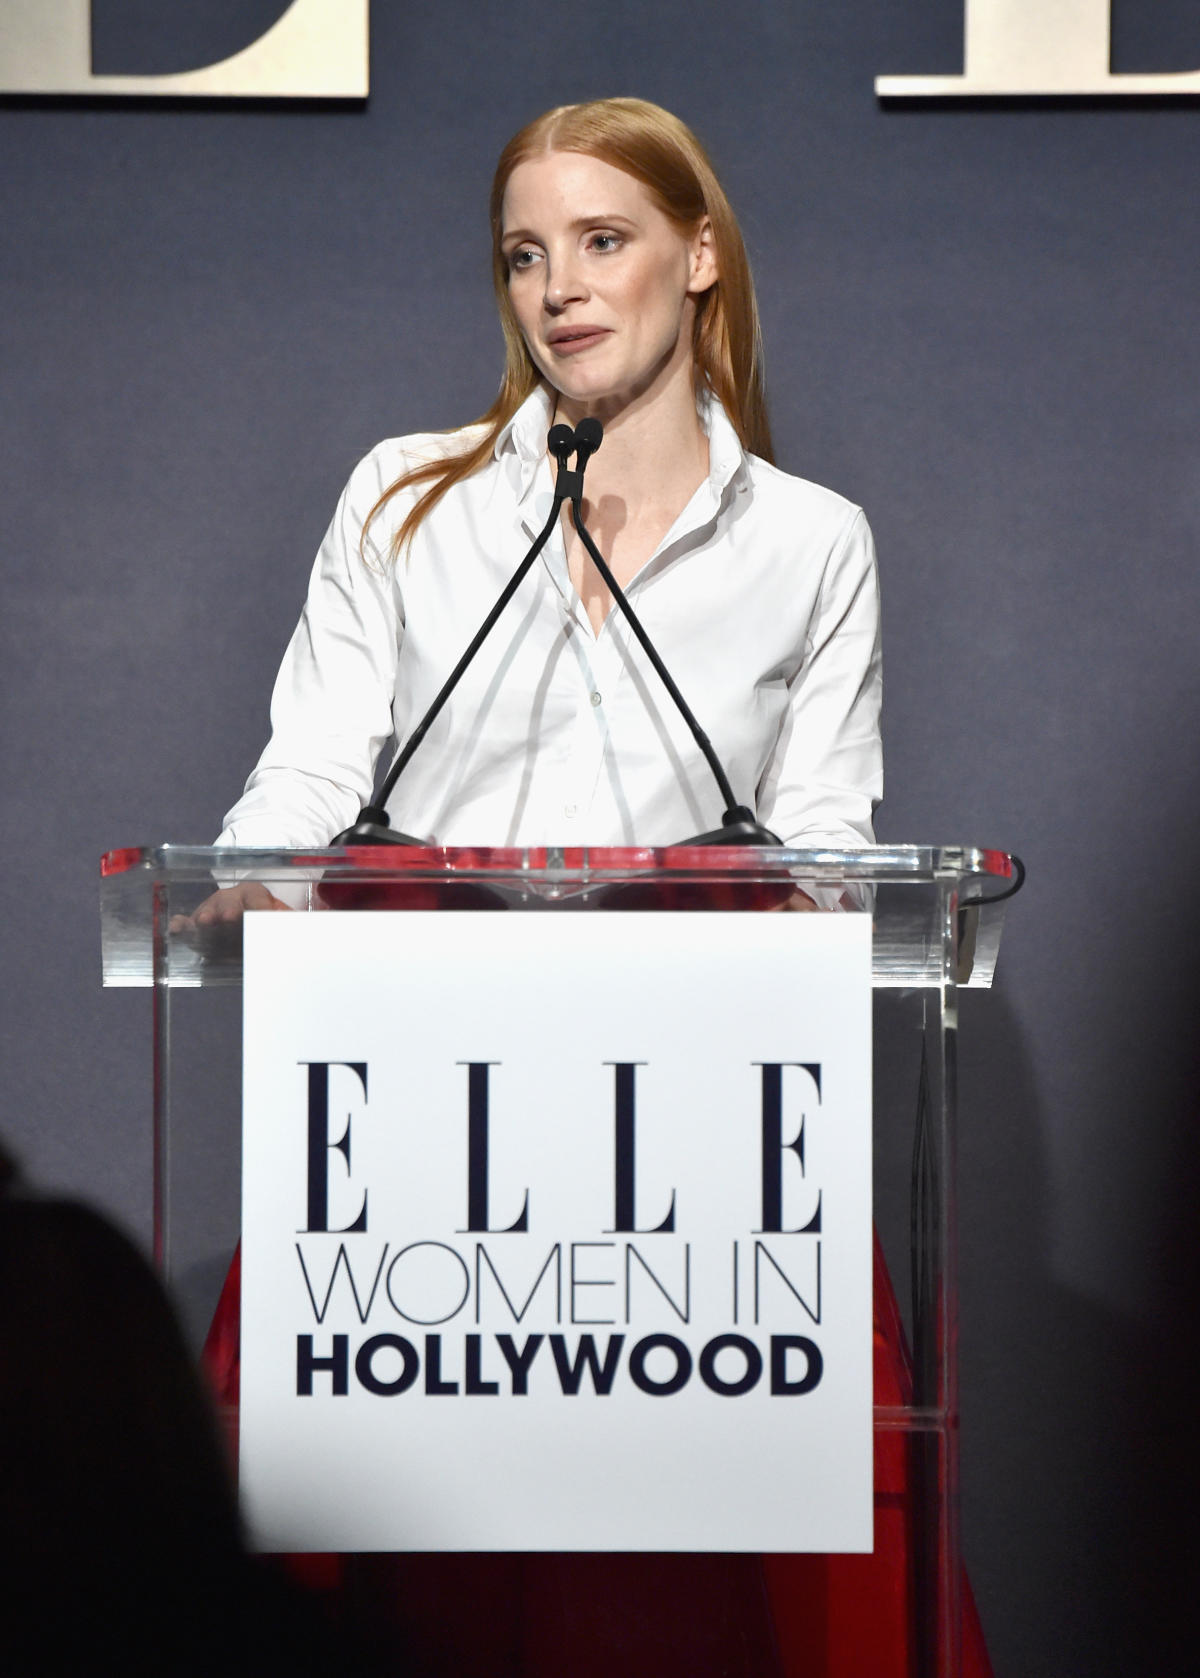 Jessica Chastain was spanked by a producer photo